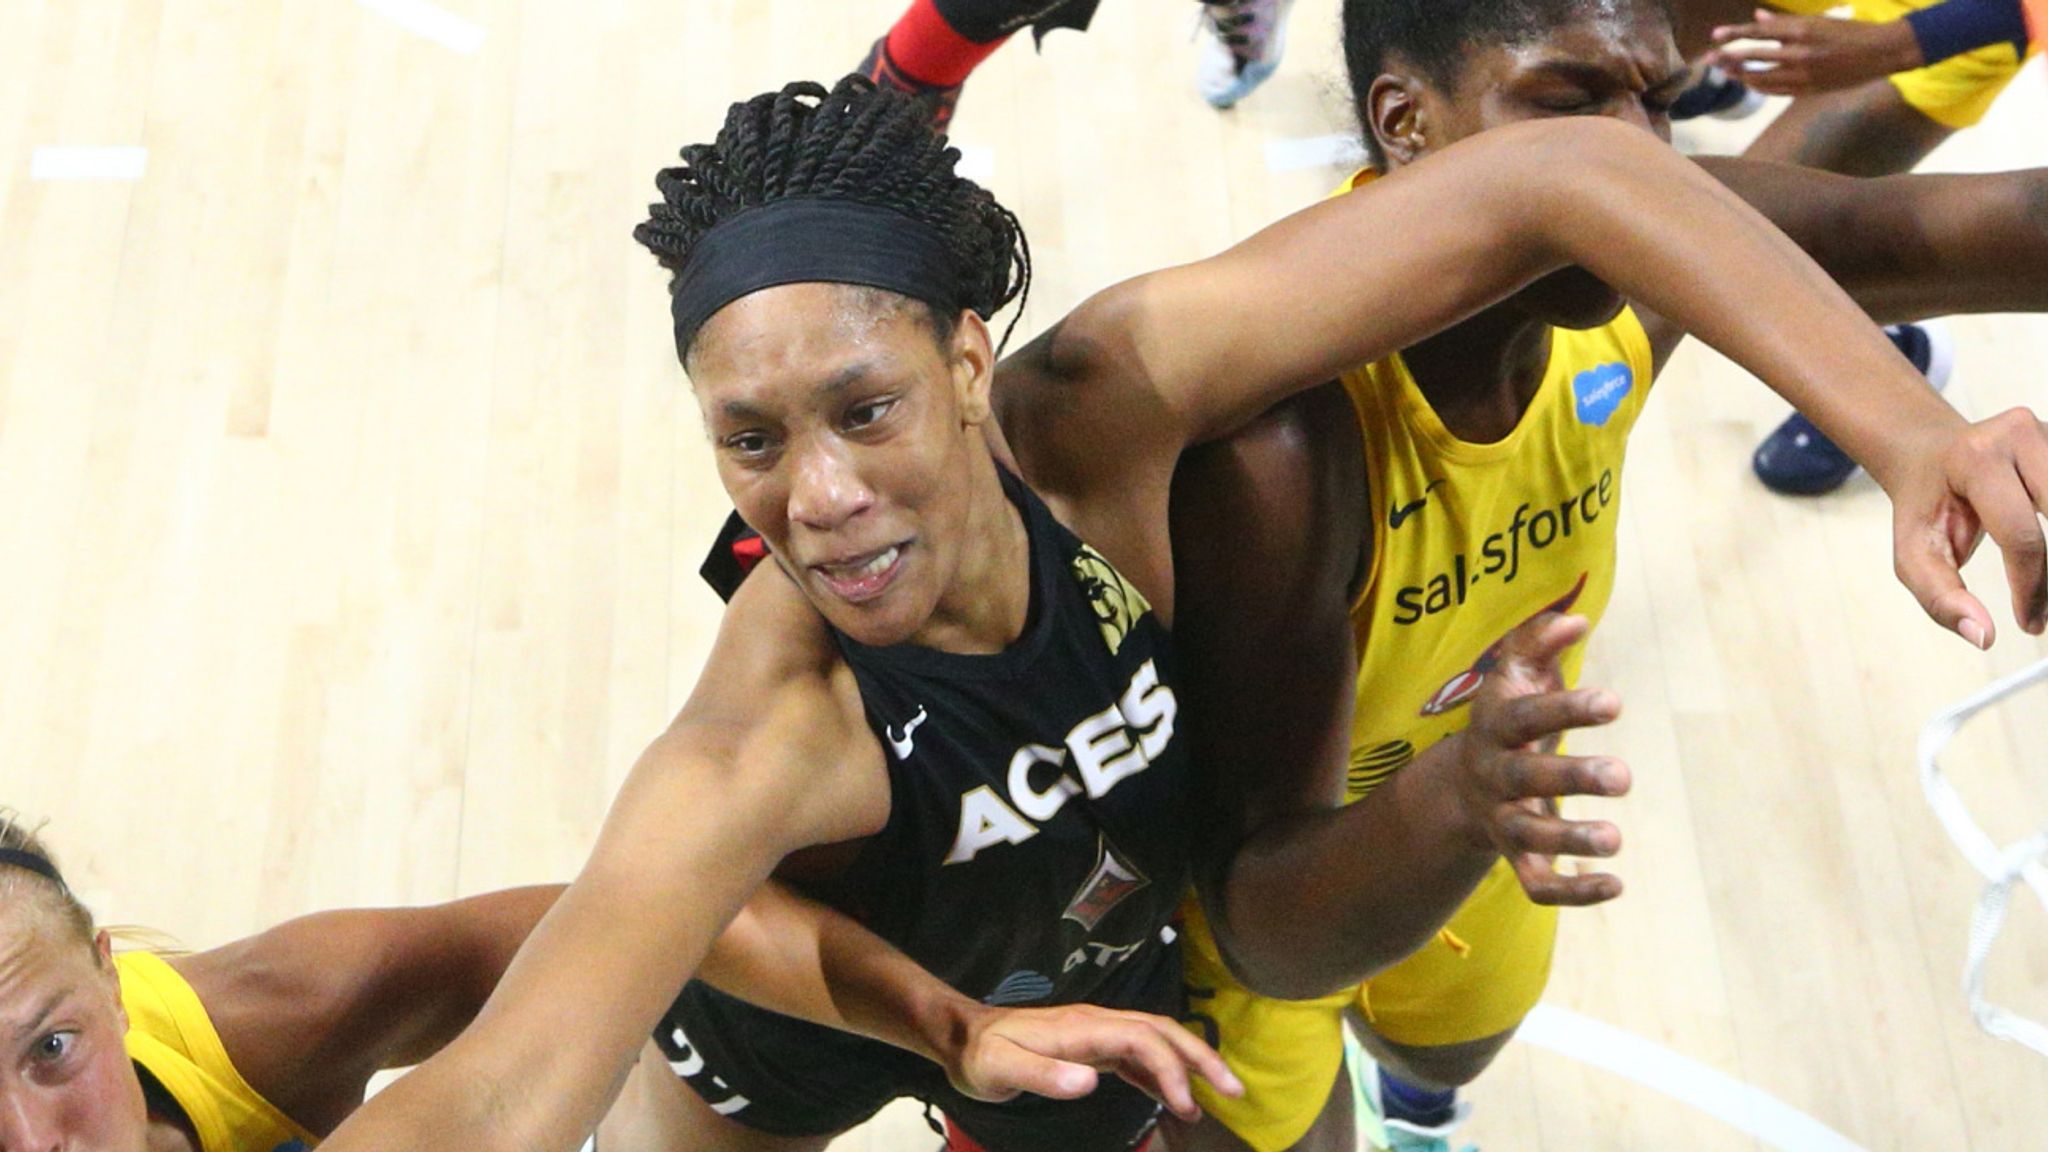 Aces vegas las wnba storm sparks they lynx wilson bigger delays argument gave forfeited loss flight lead hours following could